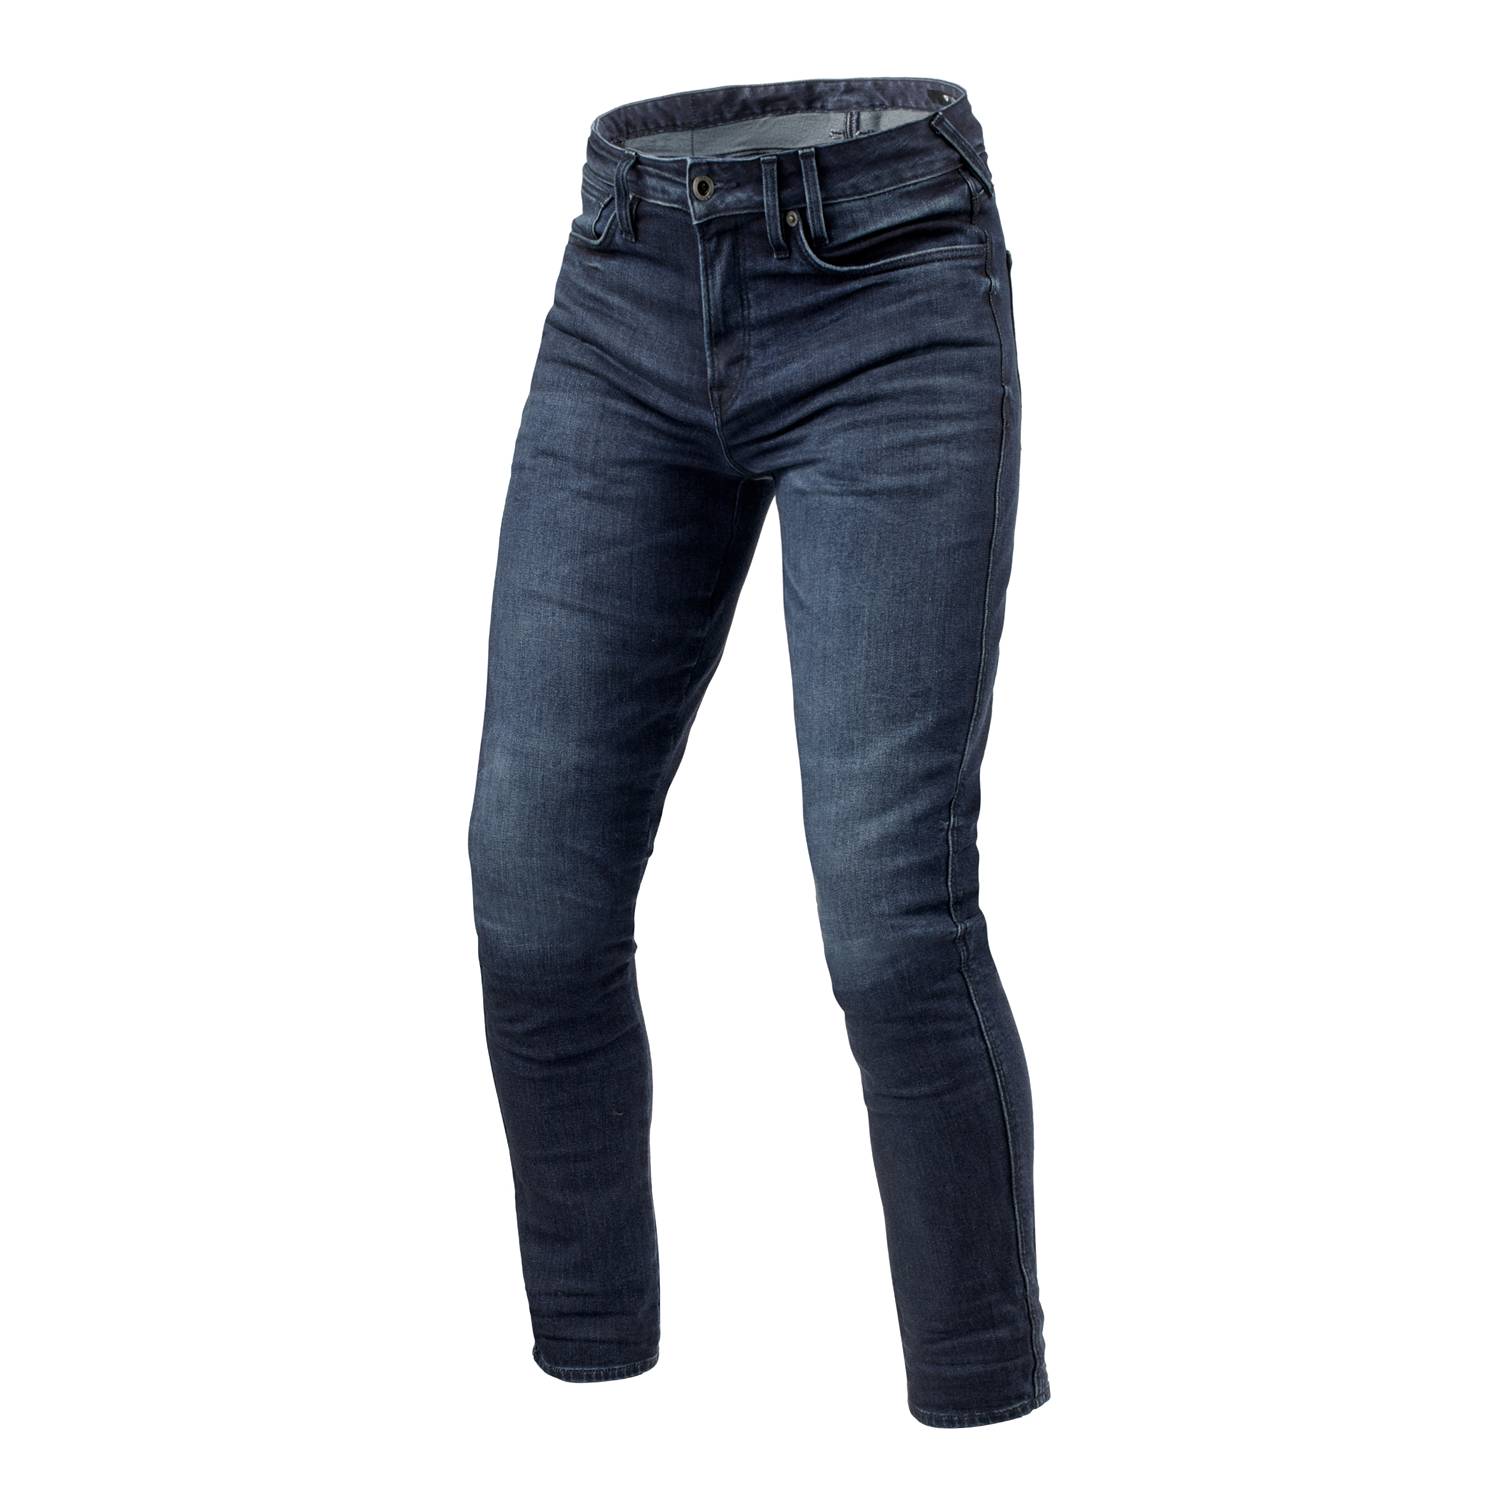 Image of EU REV'IT! Jeans Carlin SK Dark Blue Used L32 Motorcycle Jeans Taille L32/W36